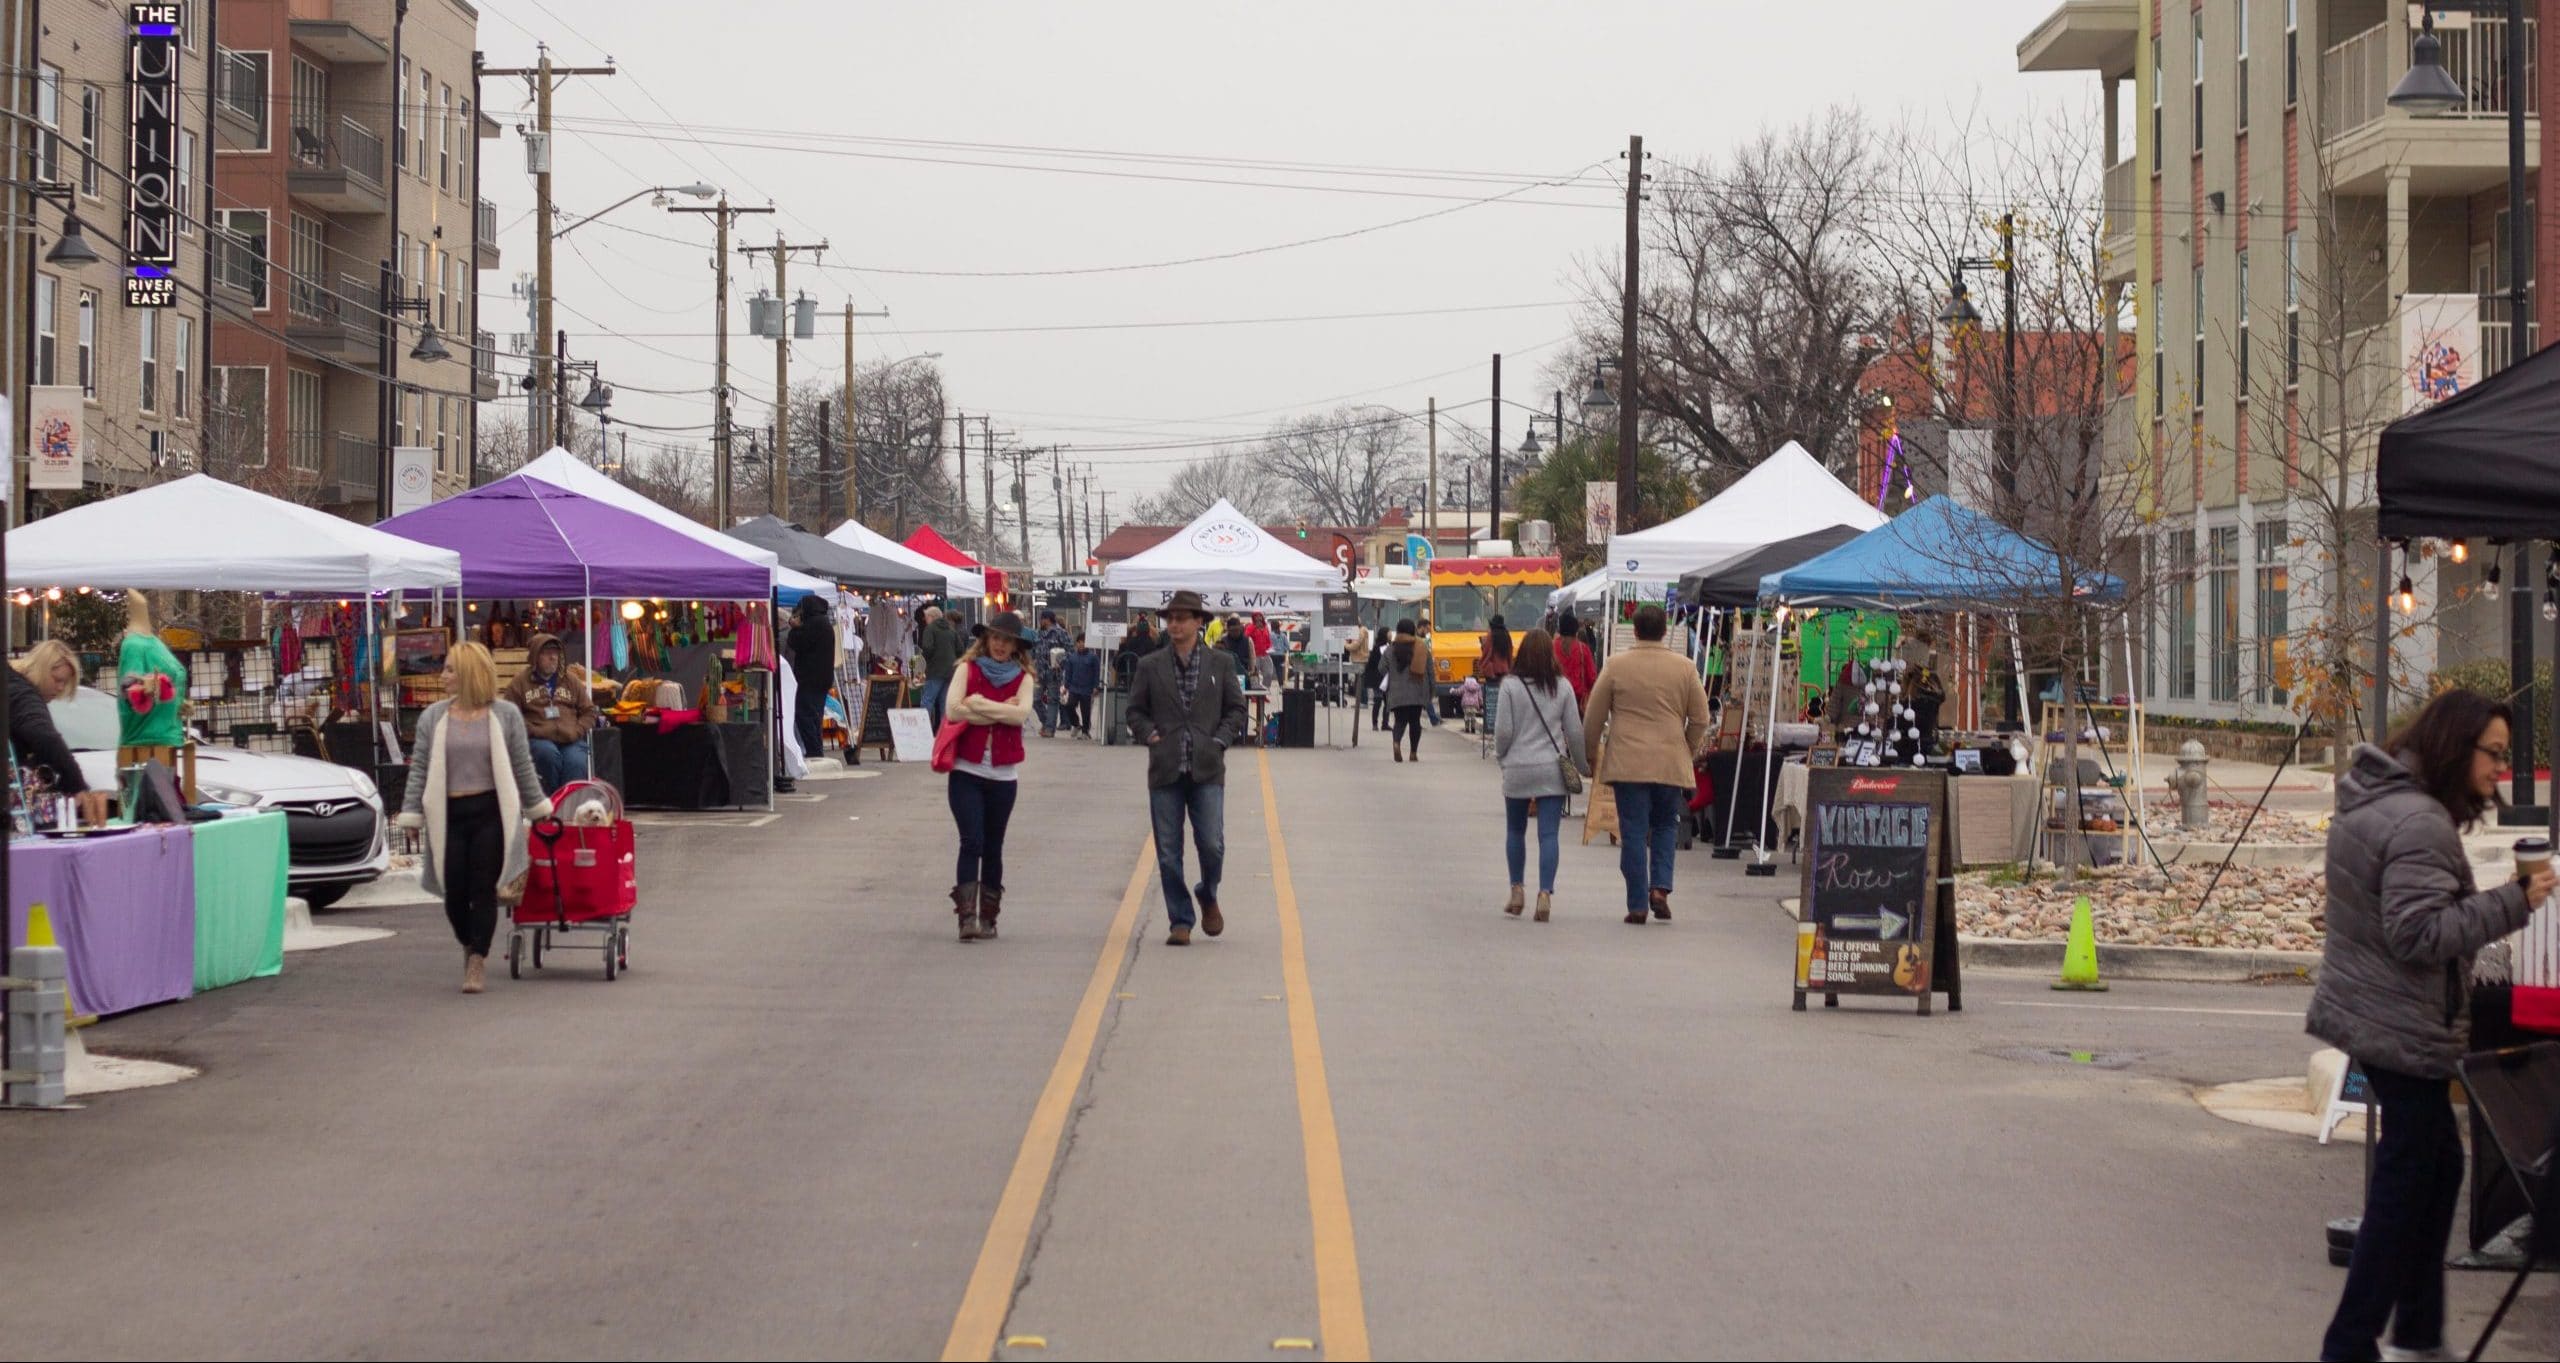 Several people walk down a street lined with canopies at a local arts and crafts show in Fort Worth